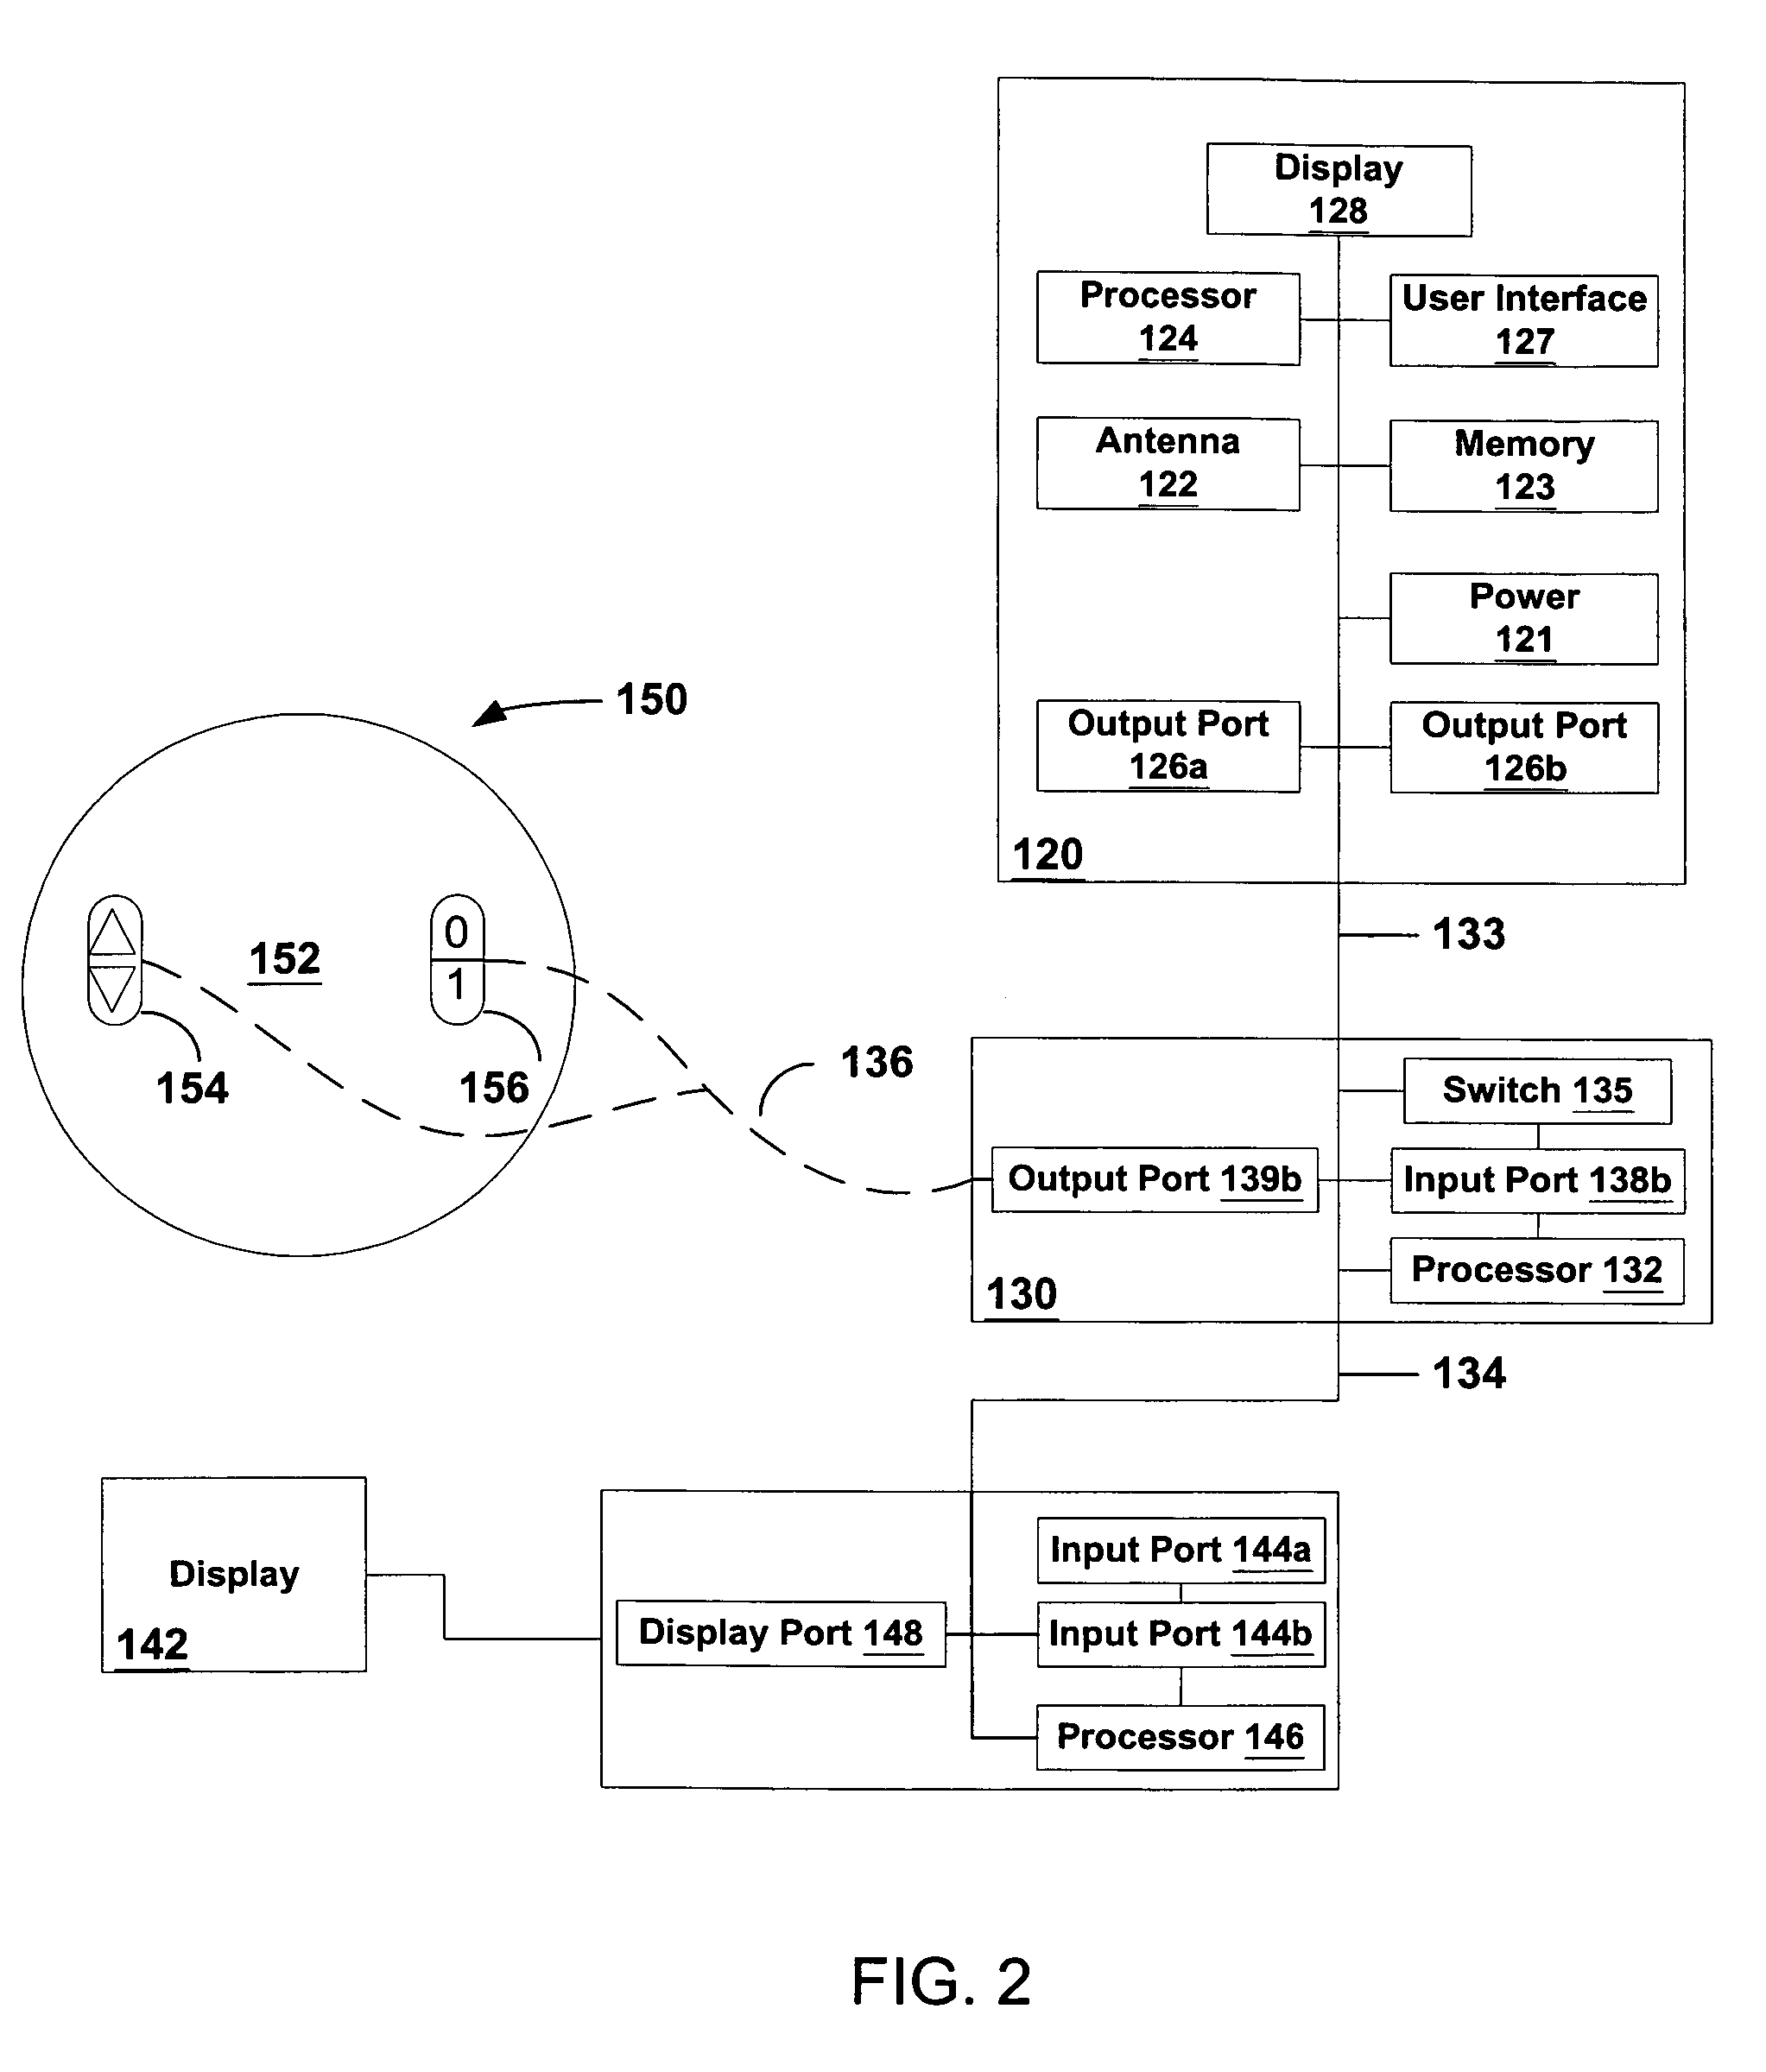 Portable communication device interface to a projection display